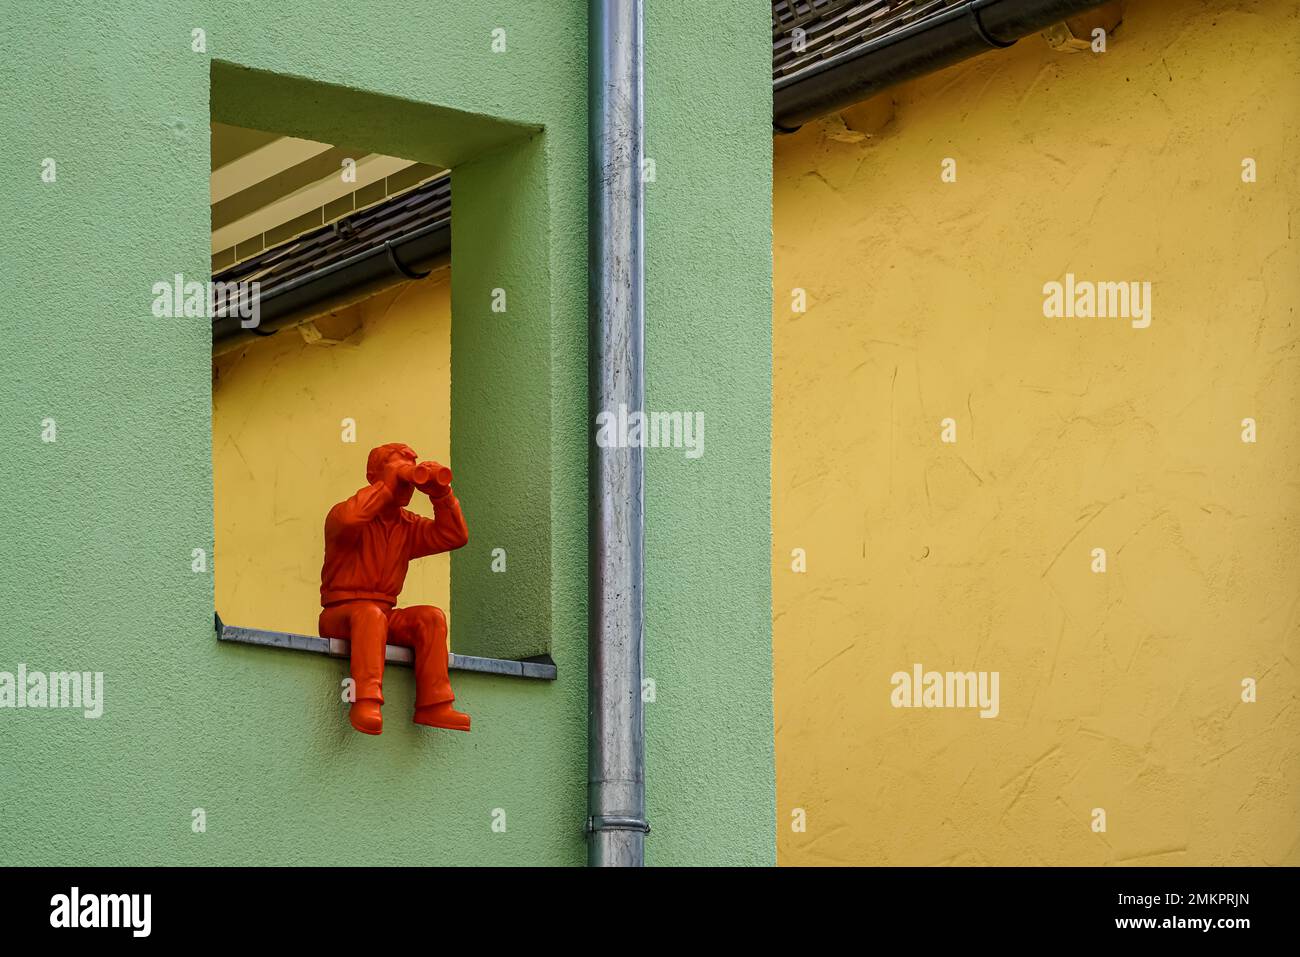 Residents have decorated a window bay of their loggia with a seated sculpture holding binoculars in front of its eyes in both hands spying Neighbors. Stock Photo